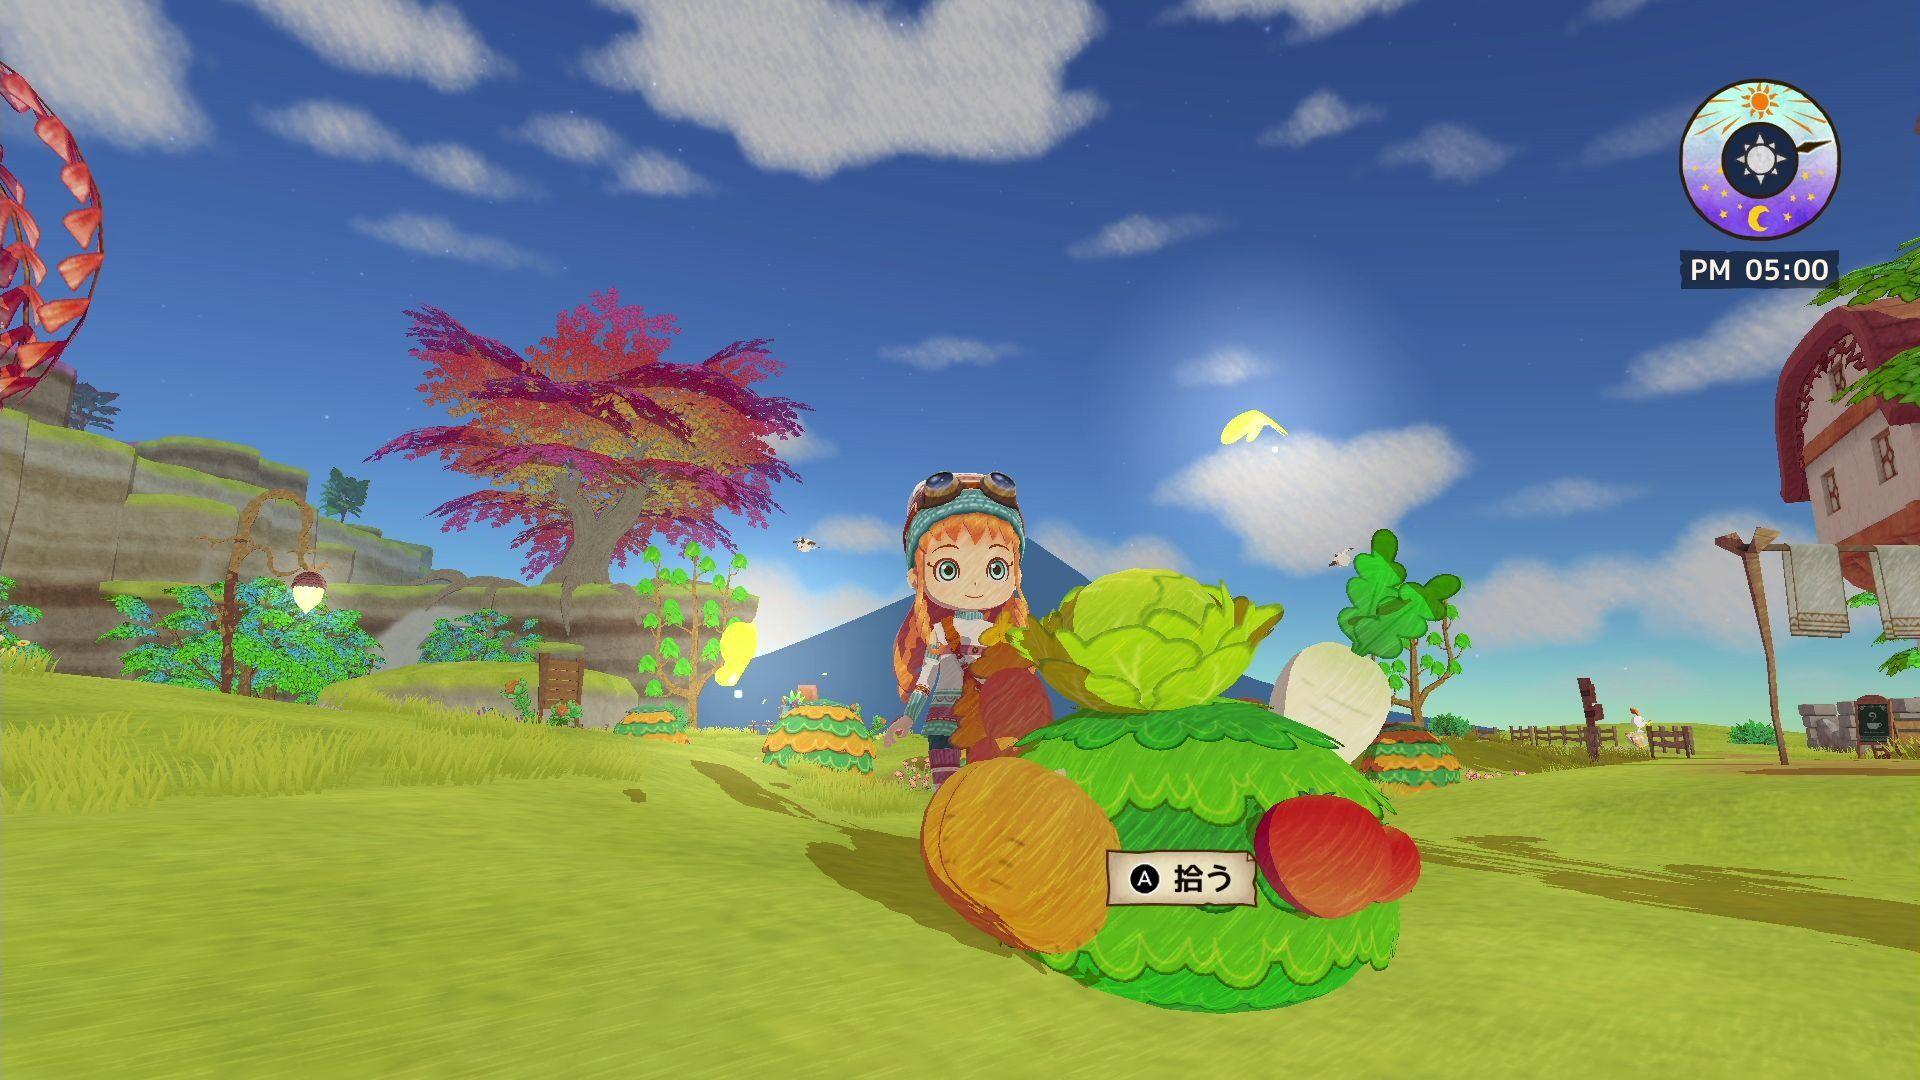 More Gameplay Details and Character Information For 'Little Dragons